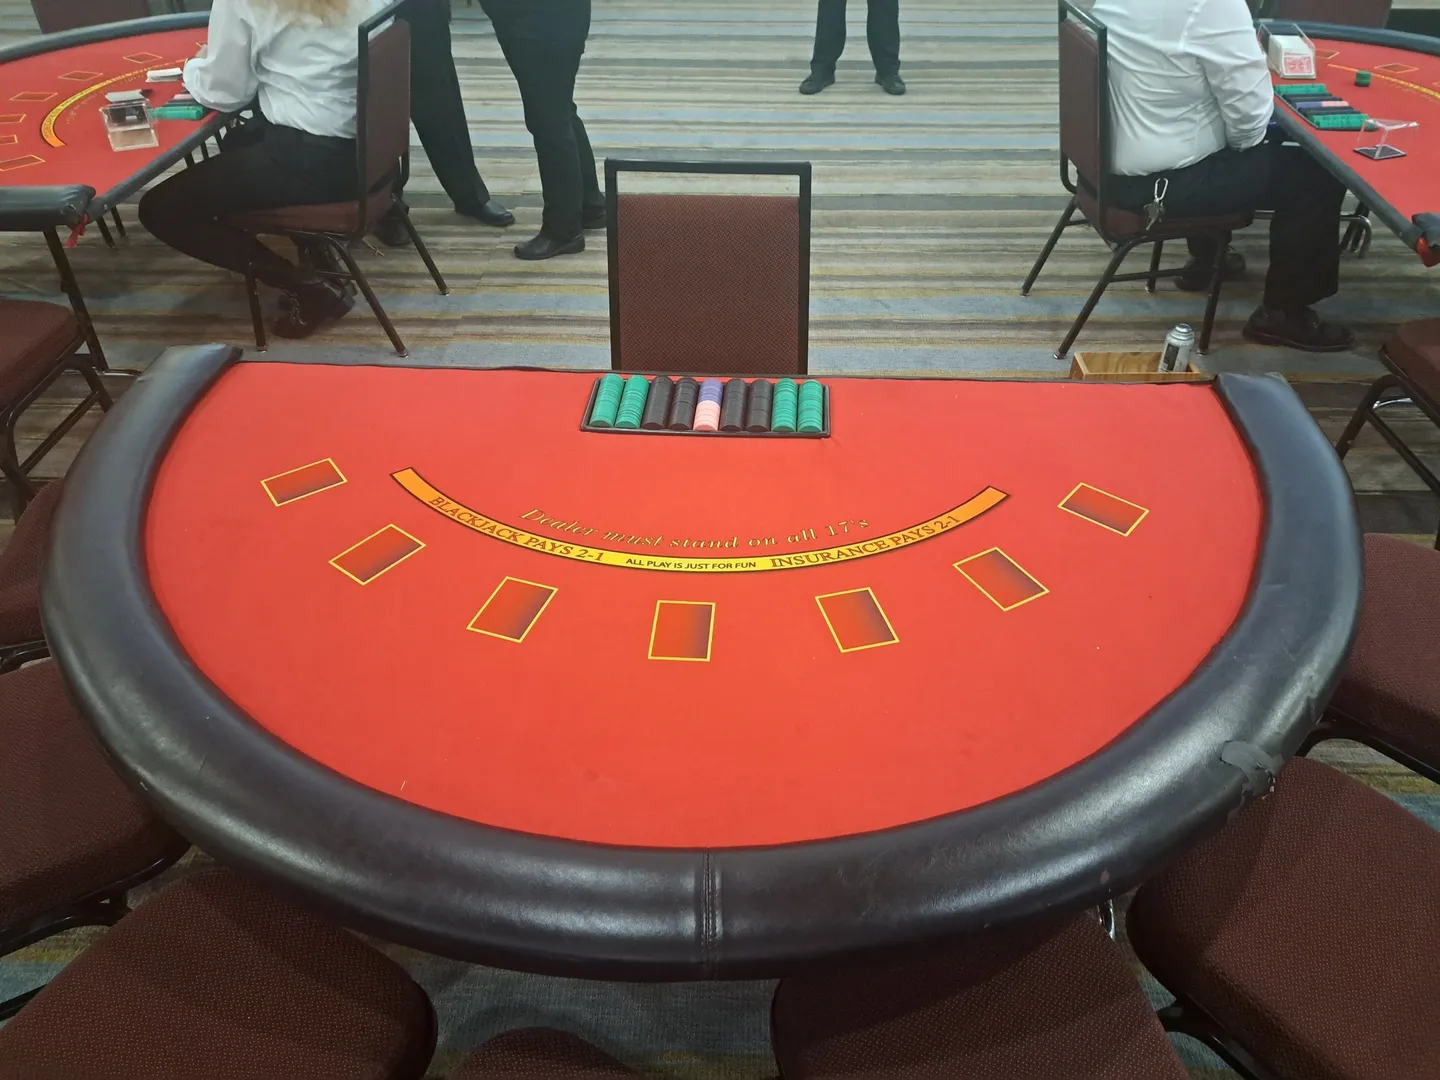 A table with cards and chairs around it